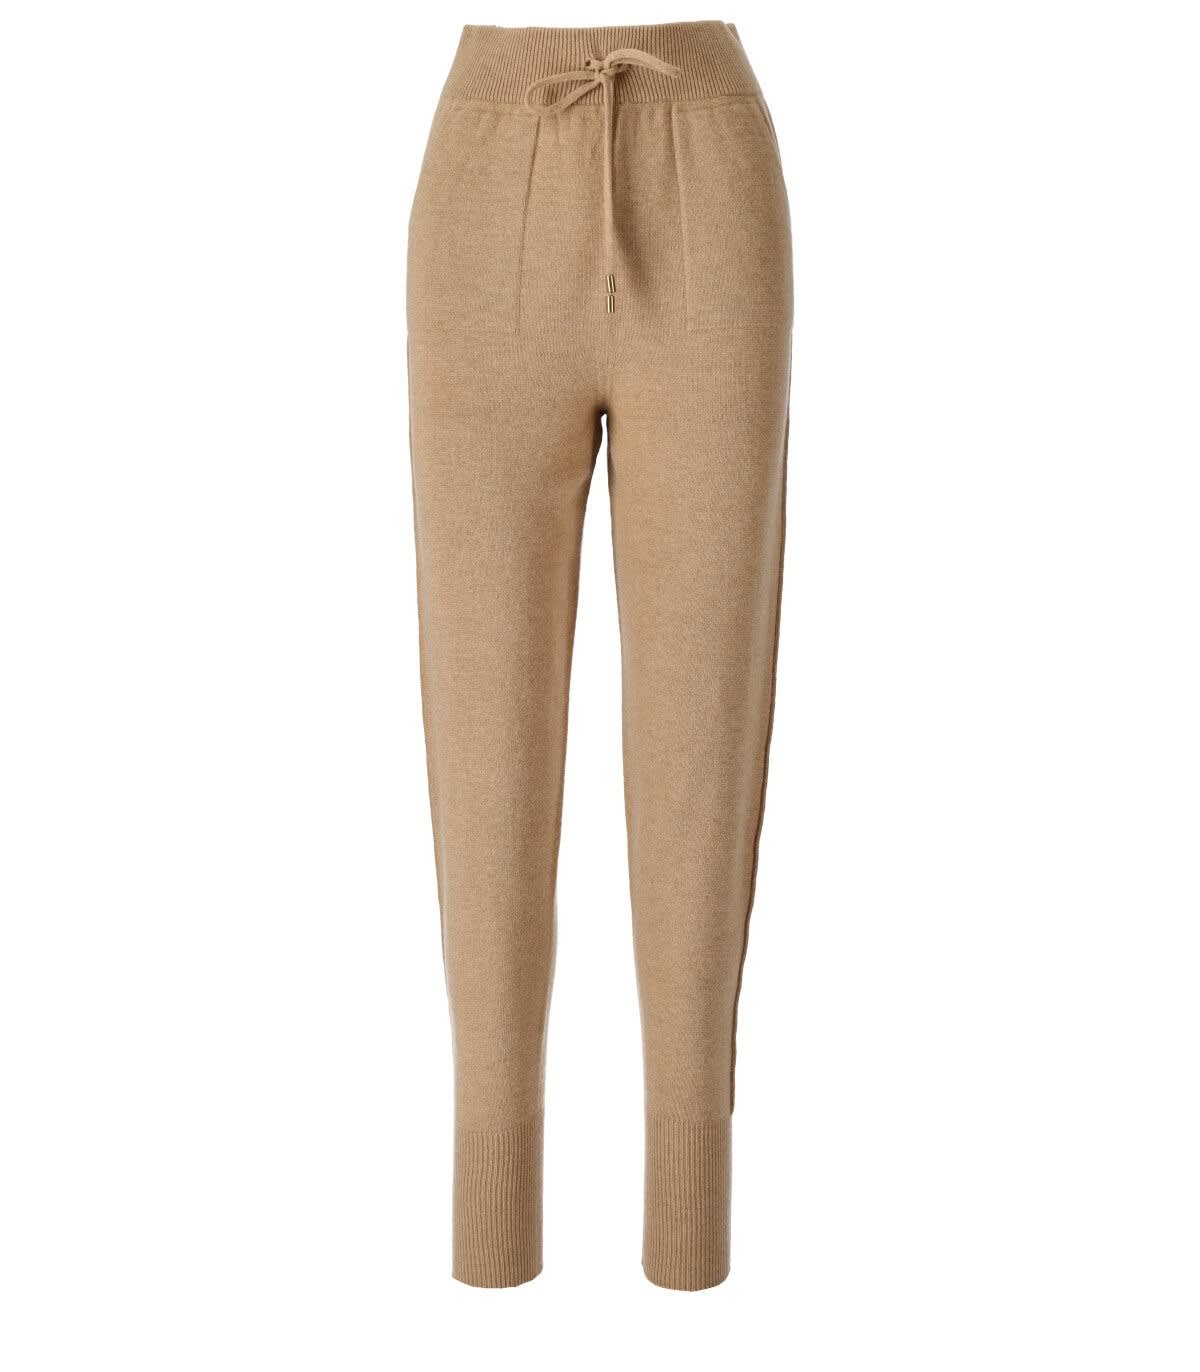 Twinset Camel Knitted Sweatpants